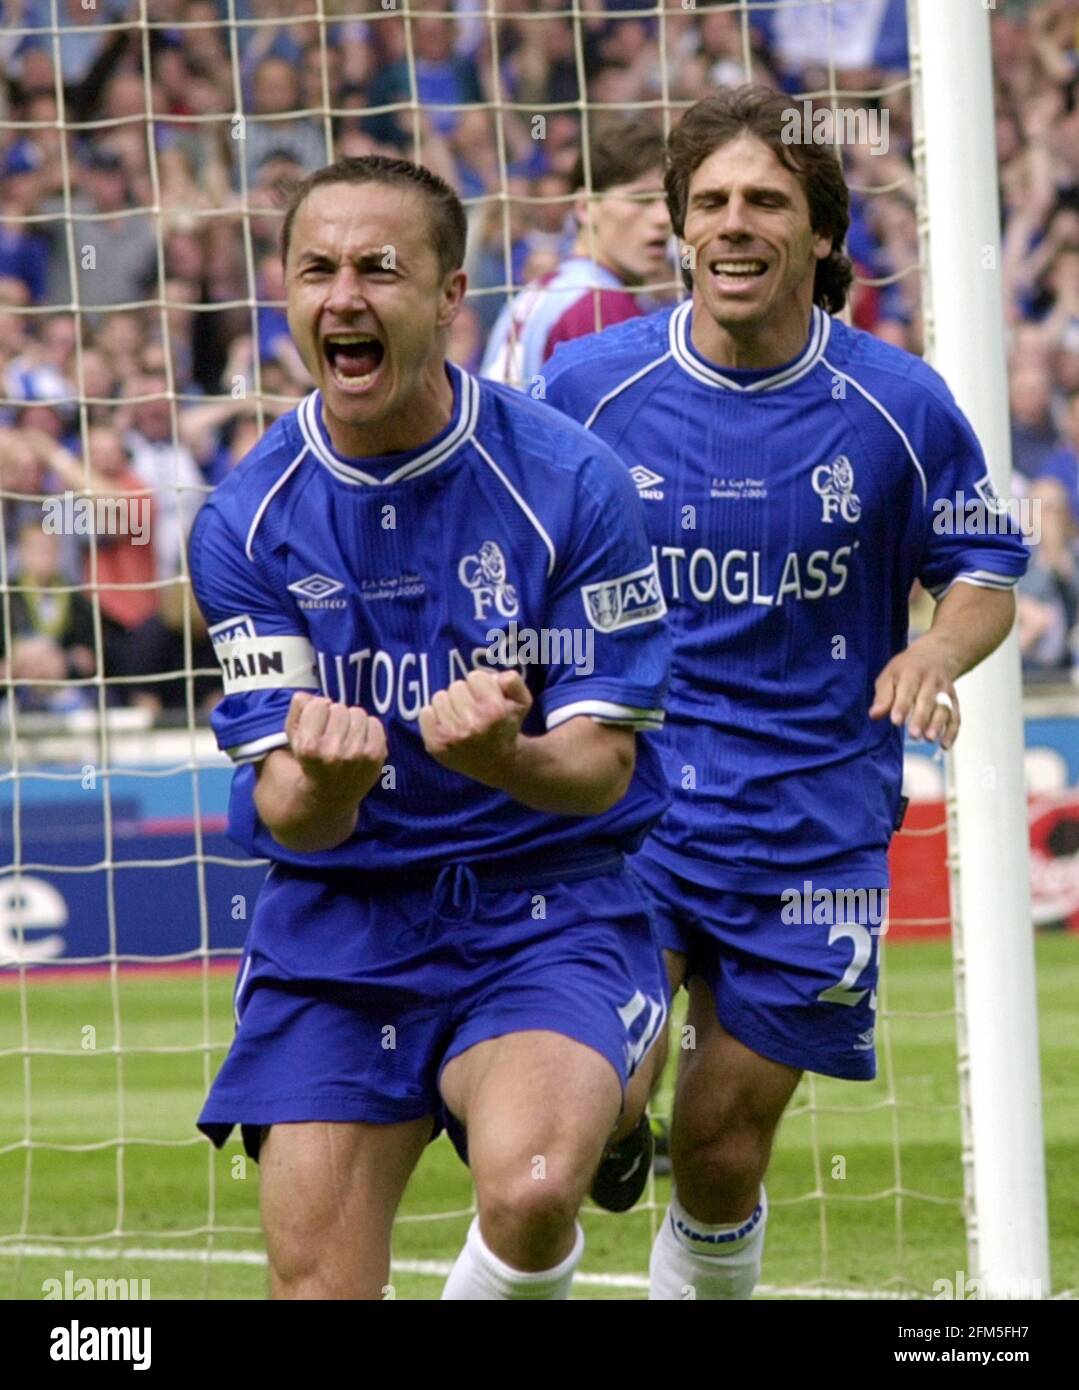 Dennis Wise Football player of Chelsea, May 2000 celebrates with Gianfranco  Zola, before realising his goal is ruled offside, against Aston Villa in  the FA Cup Final at Wembley Stadium. Chelsea won